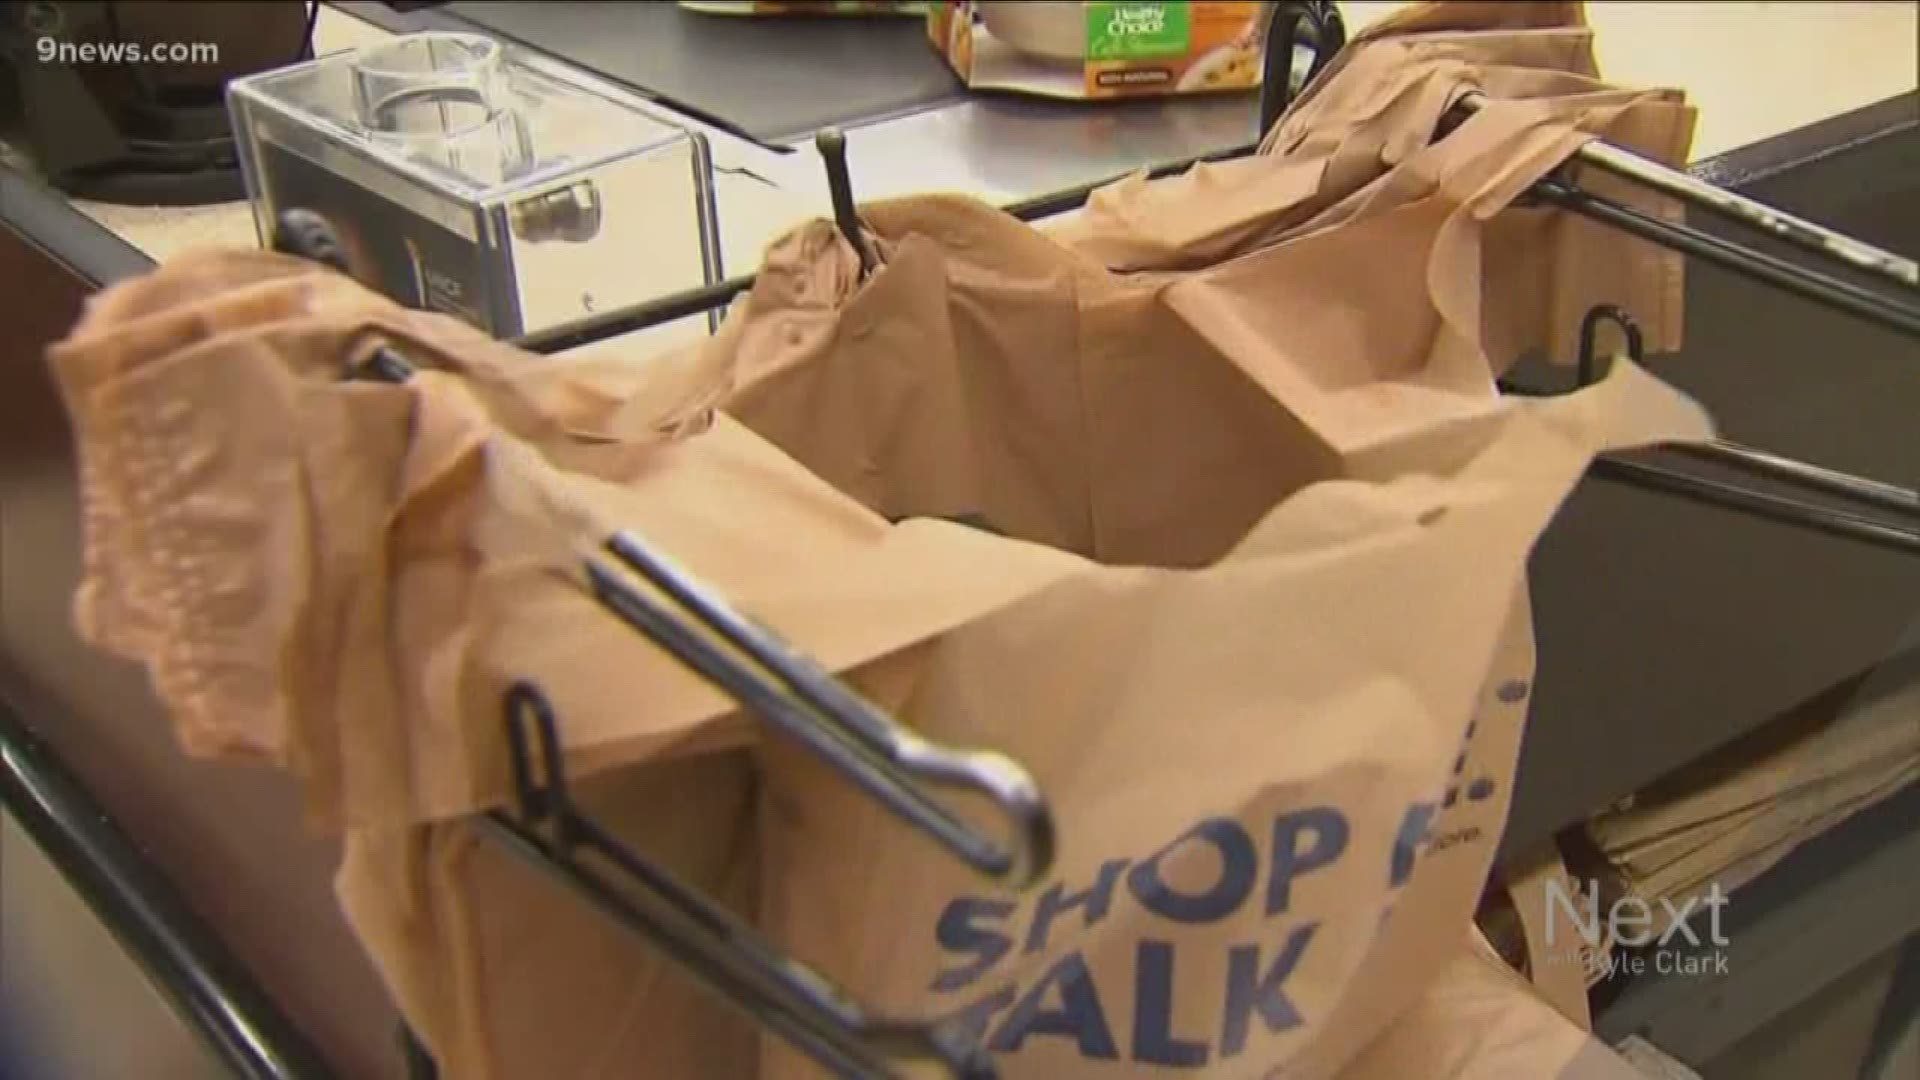 Tuesday, a Denver City Council committee unanimously decided to move a bag fee proposal onto the full council.